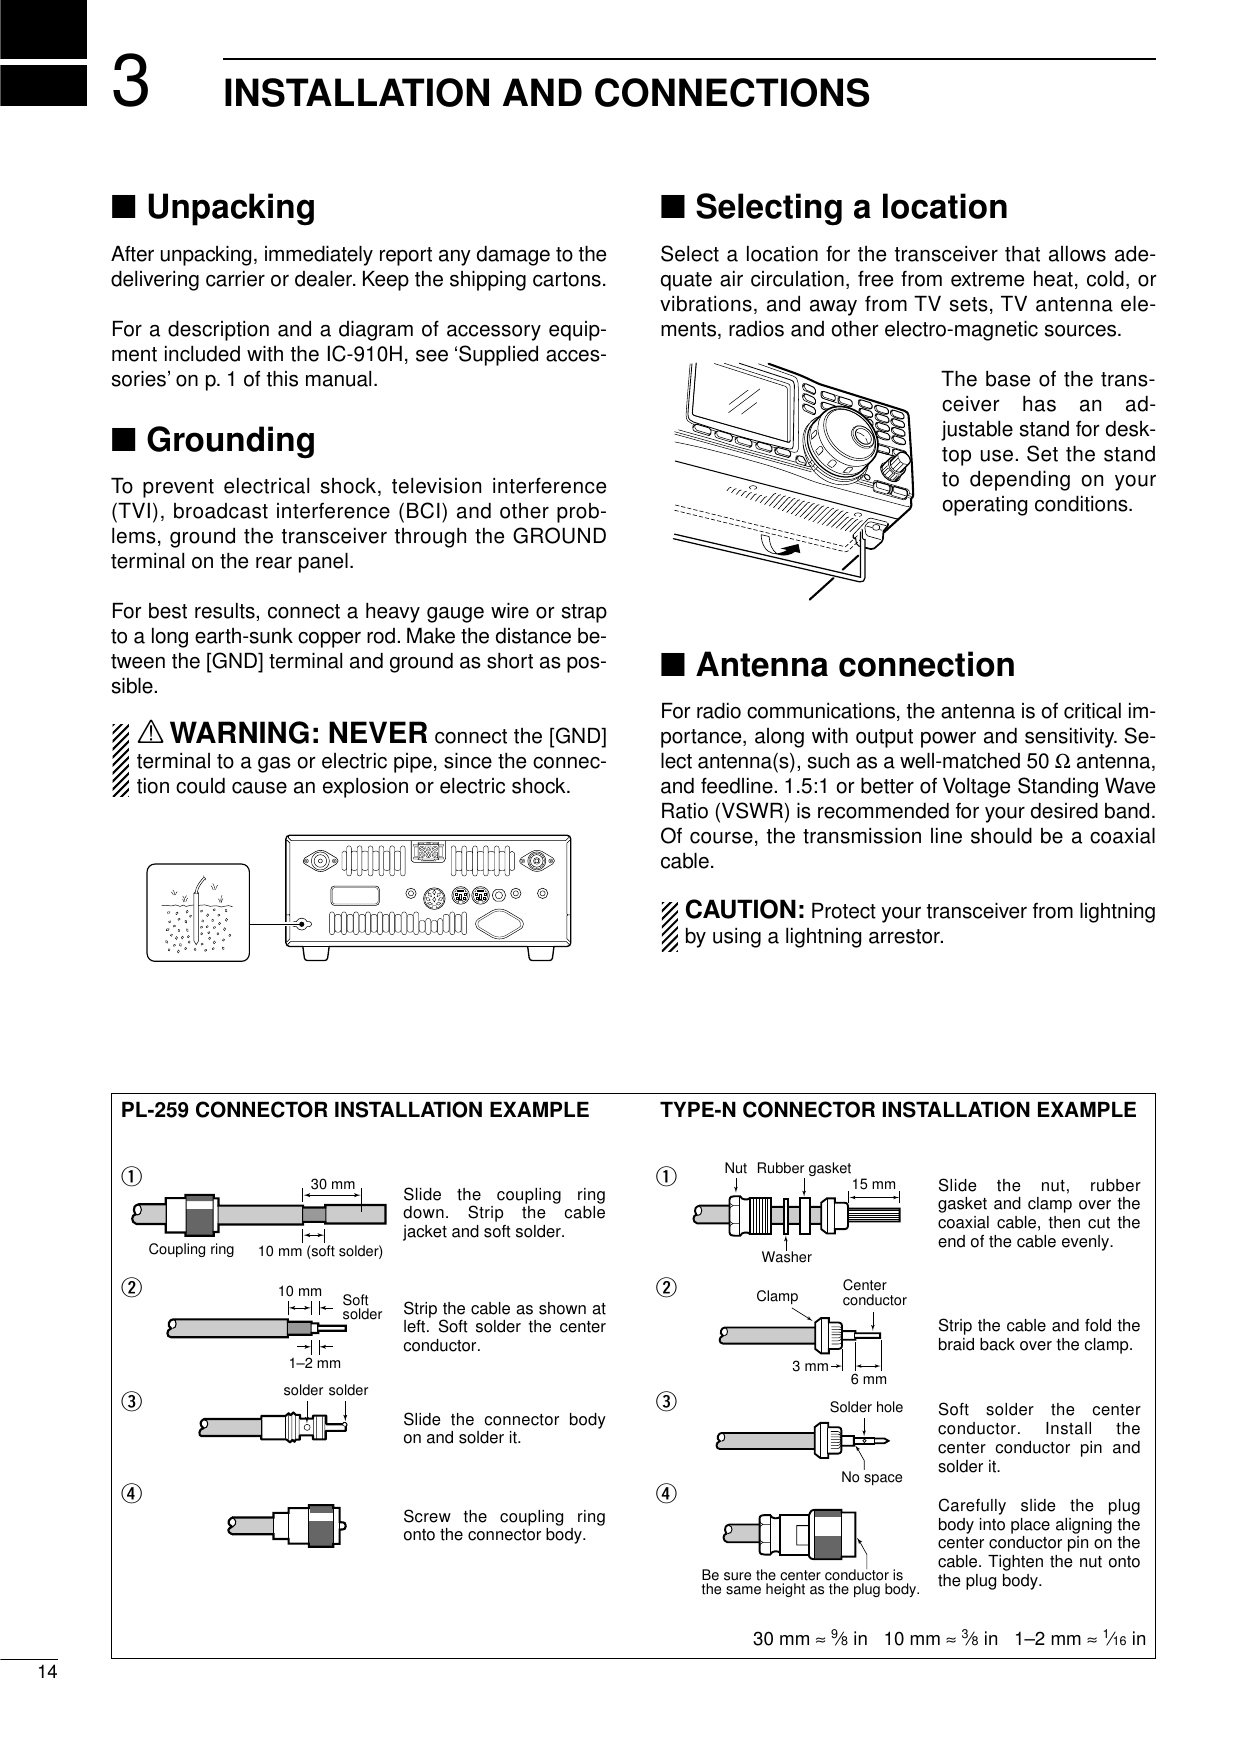 314INSTALLATION AND CONNECTIONS■UnpackingAfter unpacking, immediately report any damage to thedelivering carrier or dealer. Keep the shipping cartons.For a description and a diagram of accessory equip-ment included with the IC-910H, see ‘Supplied acces-sories’on p. 1 of this manual.■GroundingTo prevent electrical shock, television interference(TVI), broadcast interference (BCI) and other prob-lems, ground the transceiver through the GROUNDterminal on the rear panel.For best results, connect a heavy gauge wire or strapto a long earth-sunk copper rod. Make the distance be-tween the [GND] terminal and ground as short as pos-sible.RWARNING: NEVER connect the [GND]terminal to a gas or electric pipe, since the connec-tion could cause an explosion or electric shock.■Selecting a locationSelect a location for the transceiver that allows ade-quate air circulation, free from extreme heat, cold, orvibrations, and away from TV sets, TV antenna ele-ments, radios and other electro-magnetic sources.The base of the trans-ceiver has an ad-justable stand for desk-top use. Set the standto depending on youroperating conditions.■Antenna connectionFor radio communications, the antenna is of critical im-portance, along with output power and sensitivity. Se-lect antenna(s), such as a well-matched 50 Ωantenna,and feedline. 1.5:1 or better of Voltage Standing WaveRatio (VSWR) is recommended for your desired band.Of course, the transmission line should be a coaxialcable.CAUTION: Protect your transceiver from lightningby using a lightning arrestor.PL-259 CONNECTOR INSTALLATION EXAMPLE TYPE-N CONNECTOR INSTALLATION EXAMPLE30 mm ≈9⁄8in   10 mm ≈3⁄8in   1–2 mm ≈1⁄16 inSlide the coupling ring down. Strip the cable jacket and soft solder.Slide the connector body on and solder it.Screw the coupling ring onto the connector body.Strip the cable as shown at left. Soft solder the center conductor.qwerSlide the nut, rubber gasket and clamp over the coaxial cable, then cut the end of the cable evenly.Strip the cable and fold the braid back over the clamp.Soft solder the center conductor. Install the center conductor pin and solder it.Carefully slide the plug body into place aligning the center conductor pin on the cable. Tighten the nut onto the plug body.qwer15 mm3 mm 6 mm30 mm10 mm (soft solder)10 mm1–2 mmsolder solderSoftsolderCoupling ringNo spaceSolder holeBe sure the center conductor is the same height as the plug body.Clamp CenterconductorWasherNut Rubber gasket